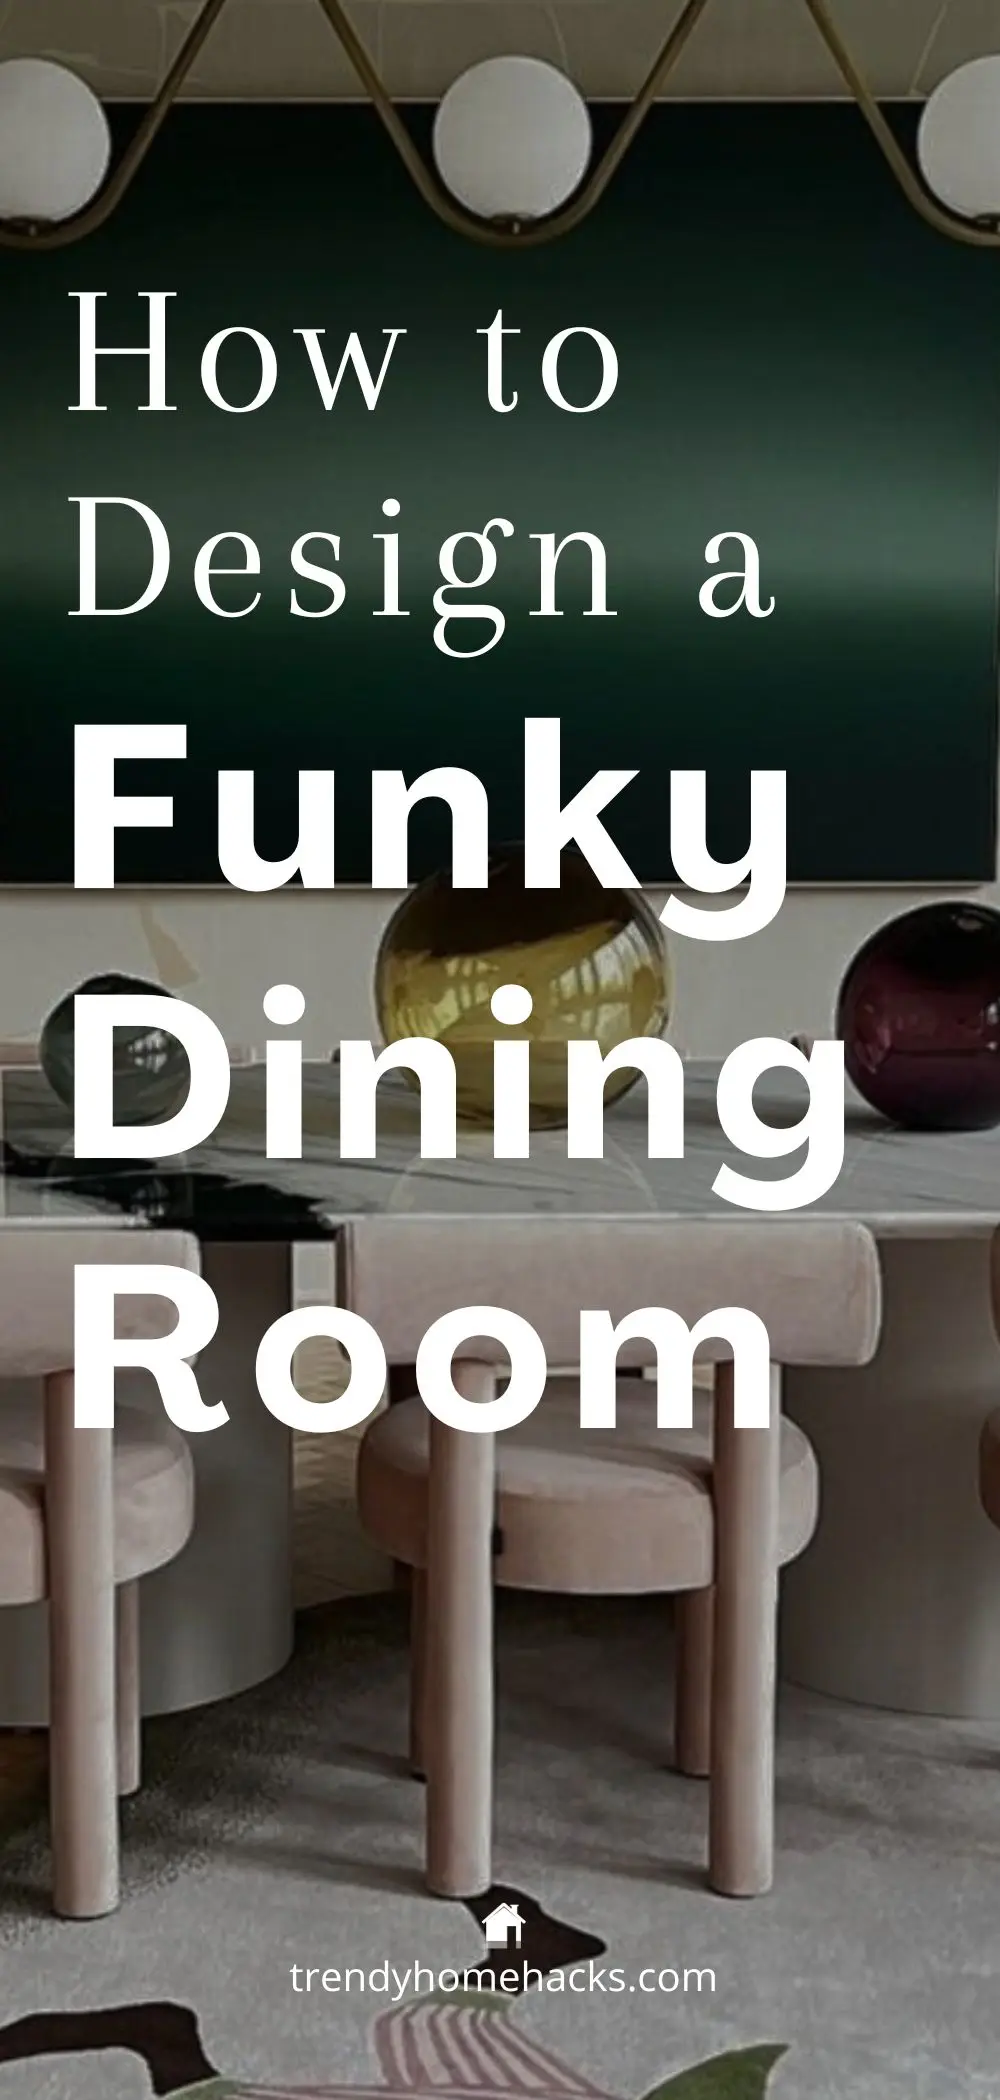 Pinterest image pin with a dark background photo and text overly "How to design a Funky Dining Room".